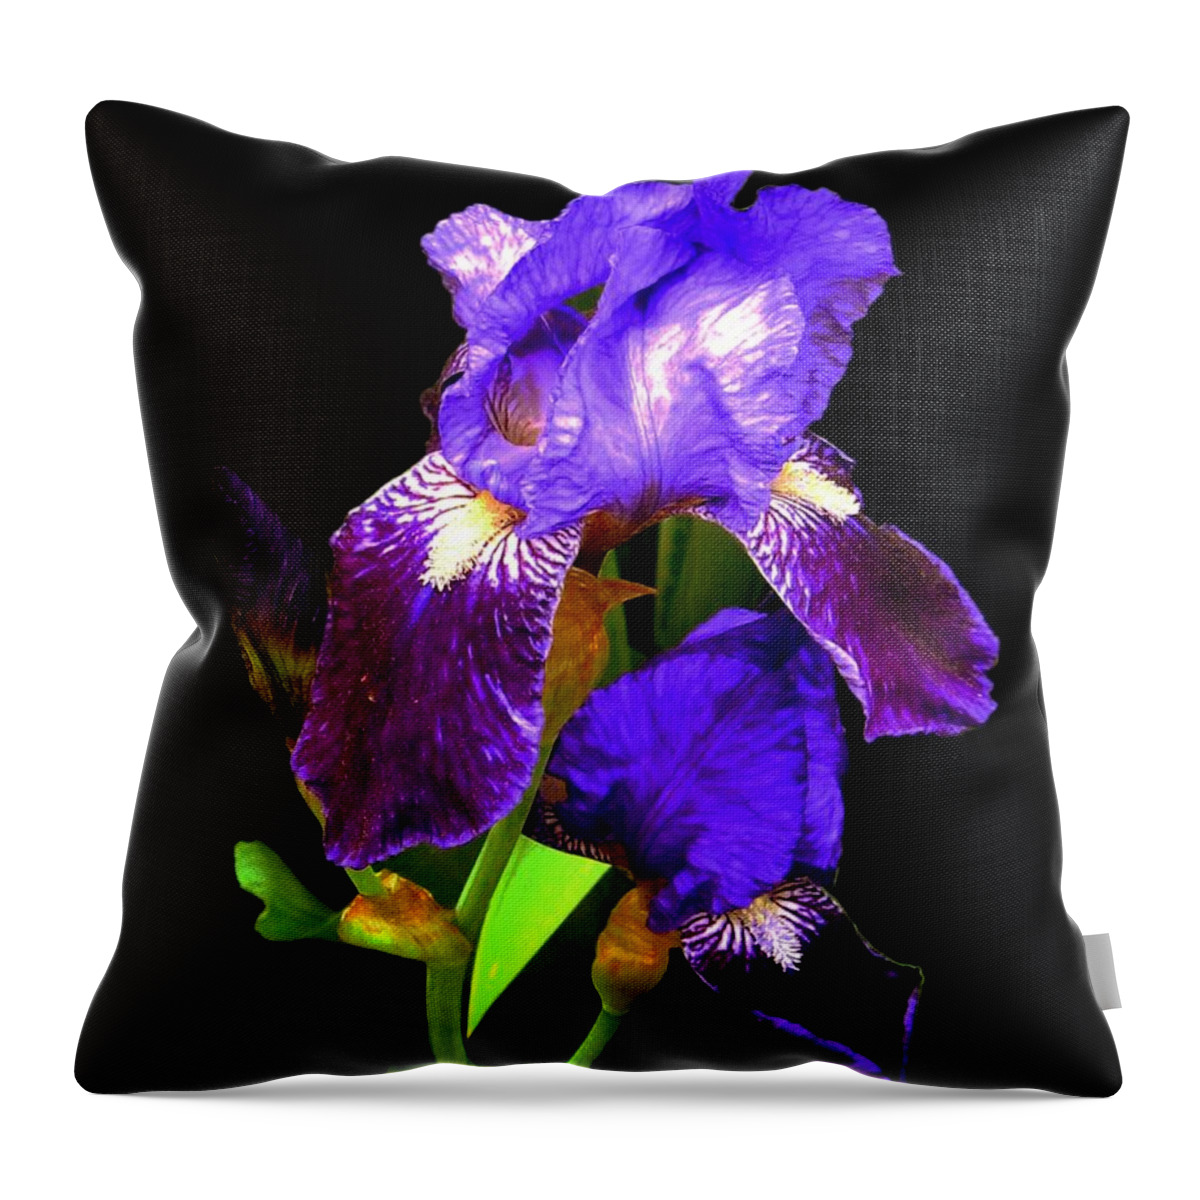 Iris Throw Pillow featuring the digital art Iris on Black by Dale  Ford